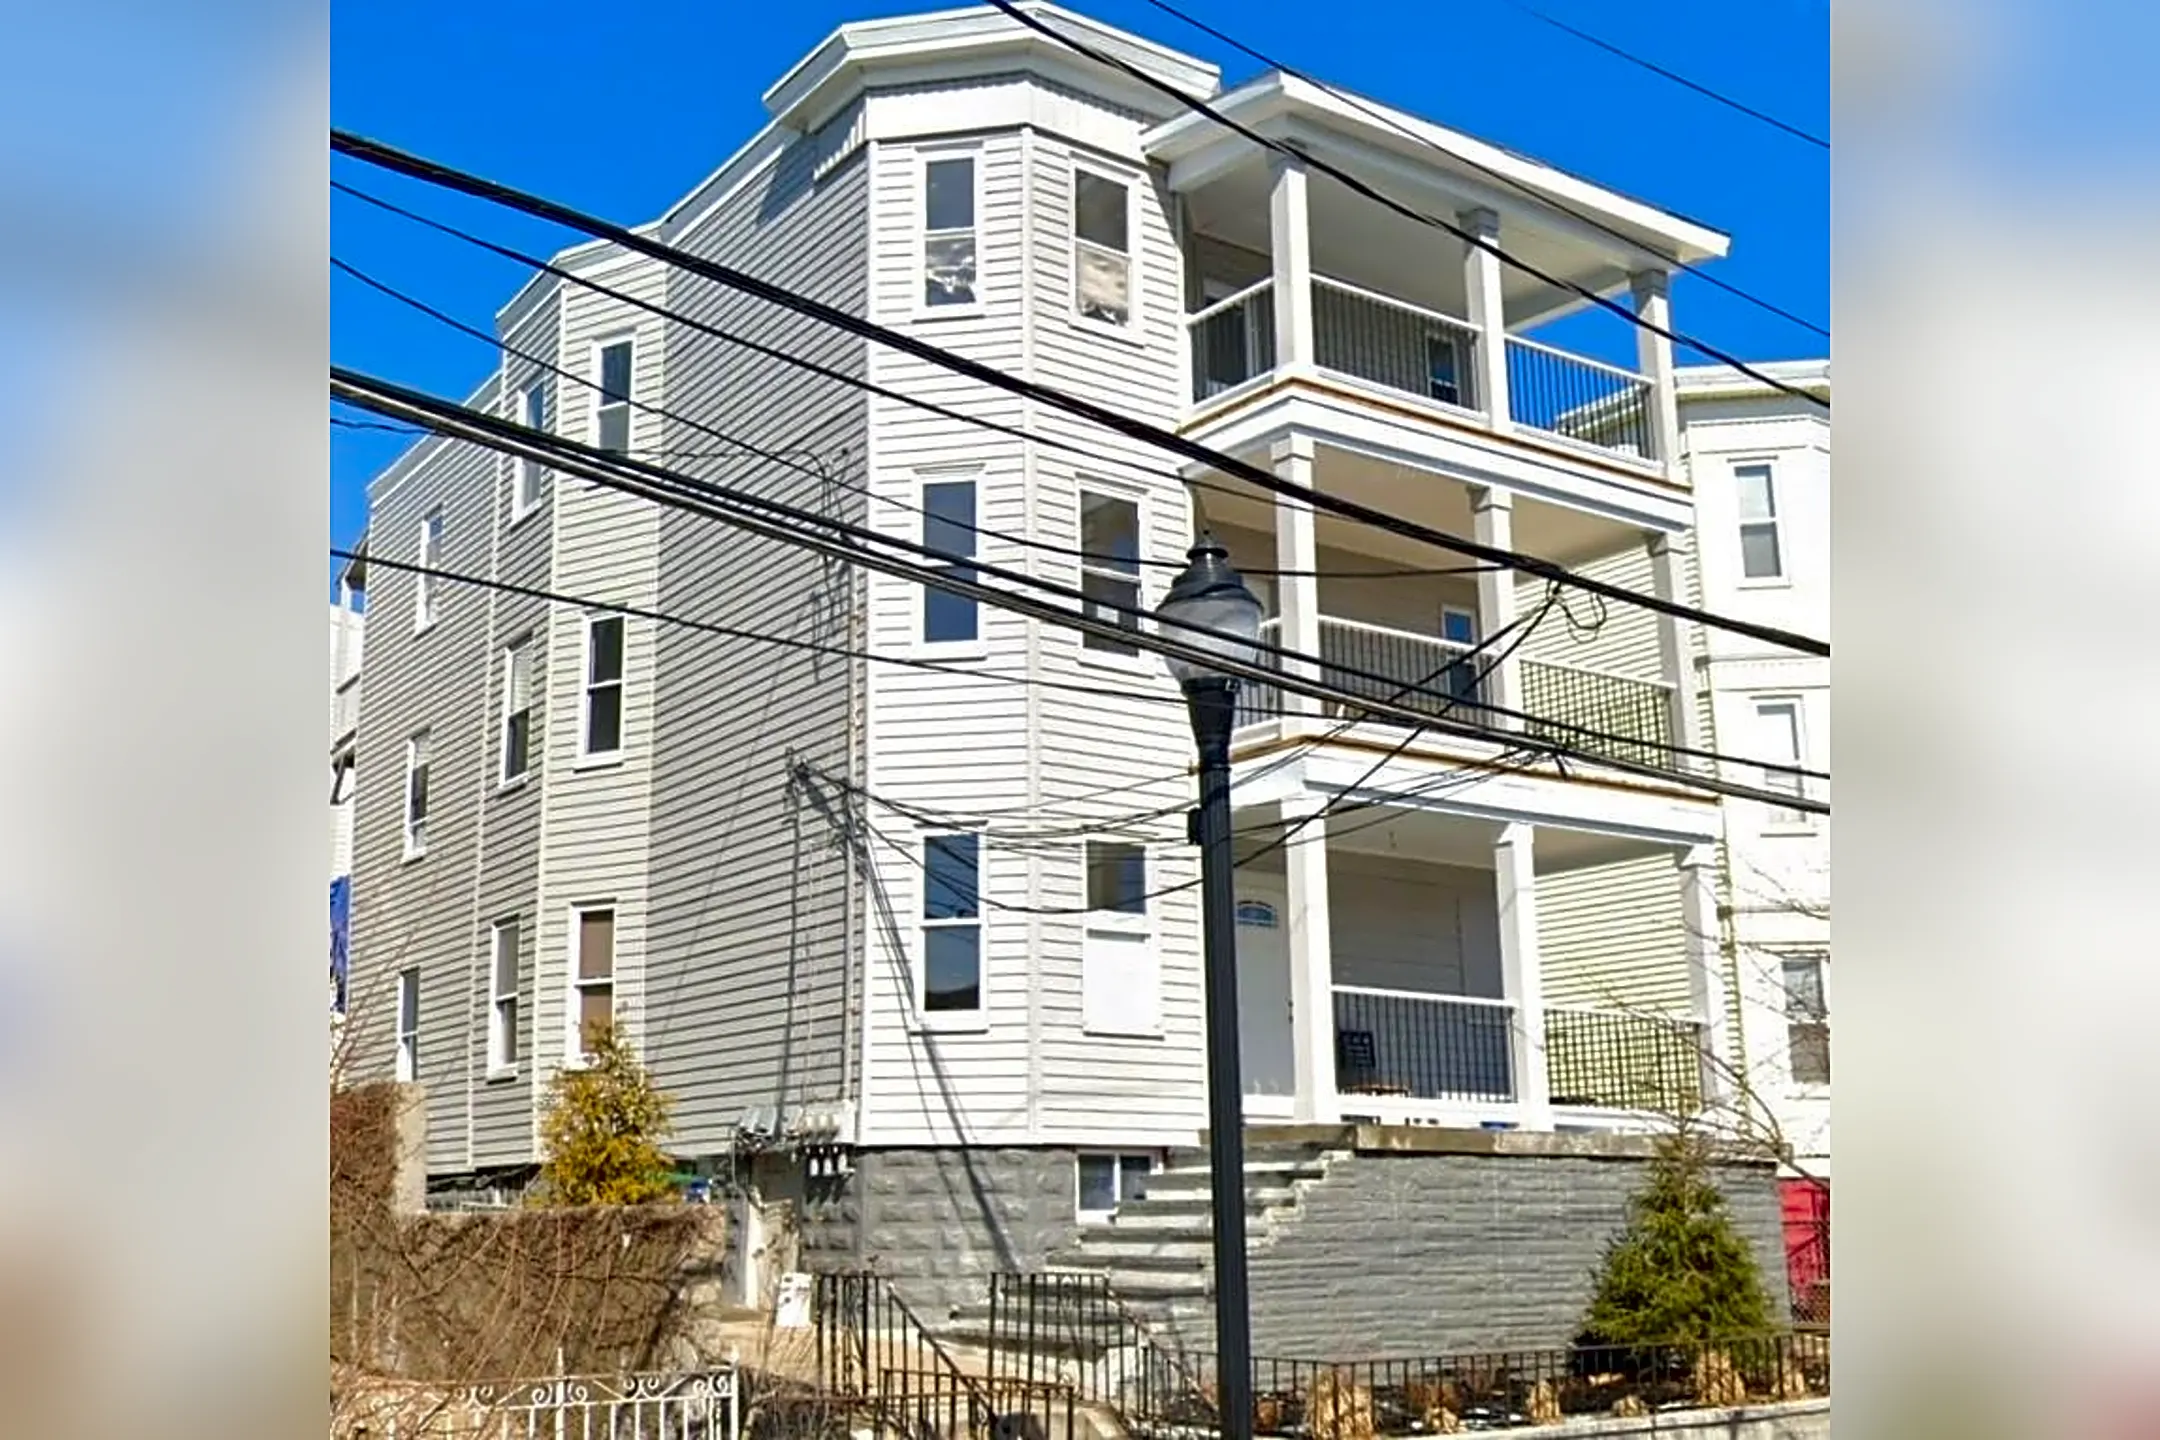 Building - 40 Temple St #1 - Somerville, MA